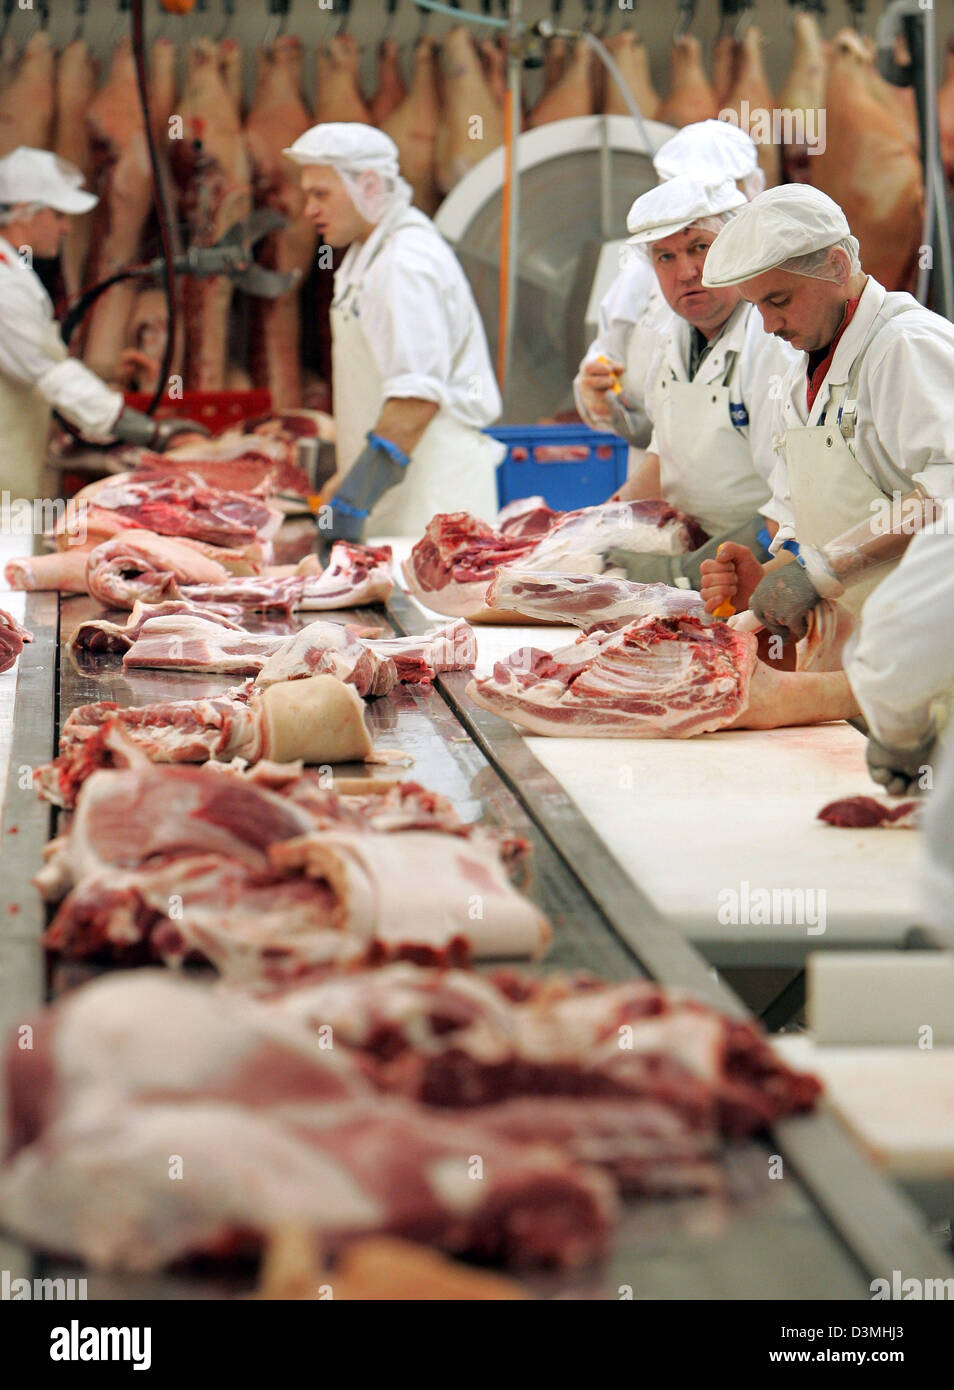 Employees of  'Ruegenwalder Muehle' prepare pork meat for the production of sausages at the company's factory site in Bad Zwischenahn, Germany, Thursday, 16 March 2006. The company makes amongst others the famous 'Teewurst' (smoked pork pate), which is a registered trademark since 1957. Photo: Ingo Wagner Stock Photo